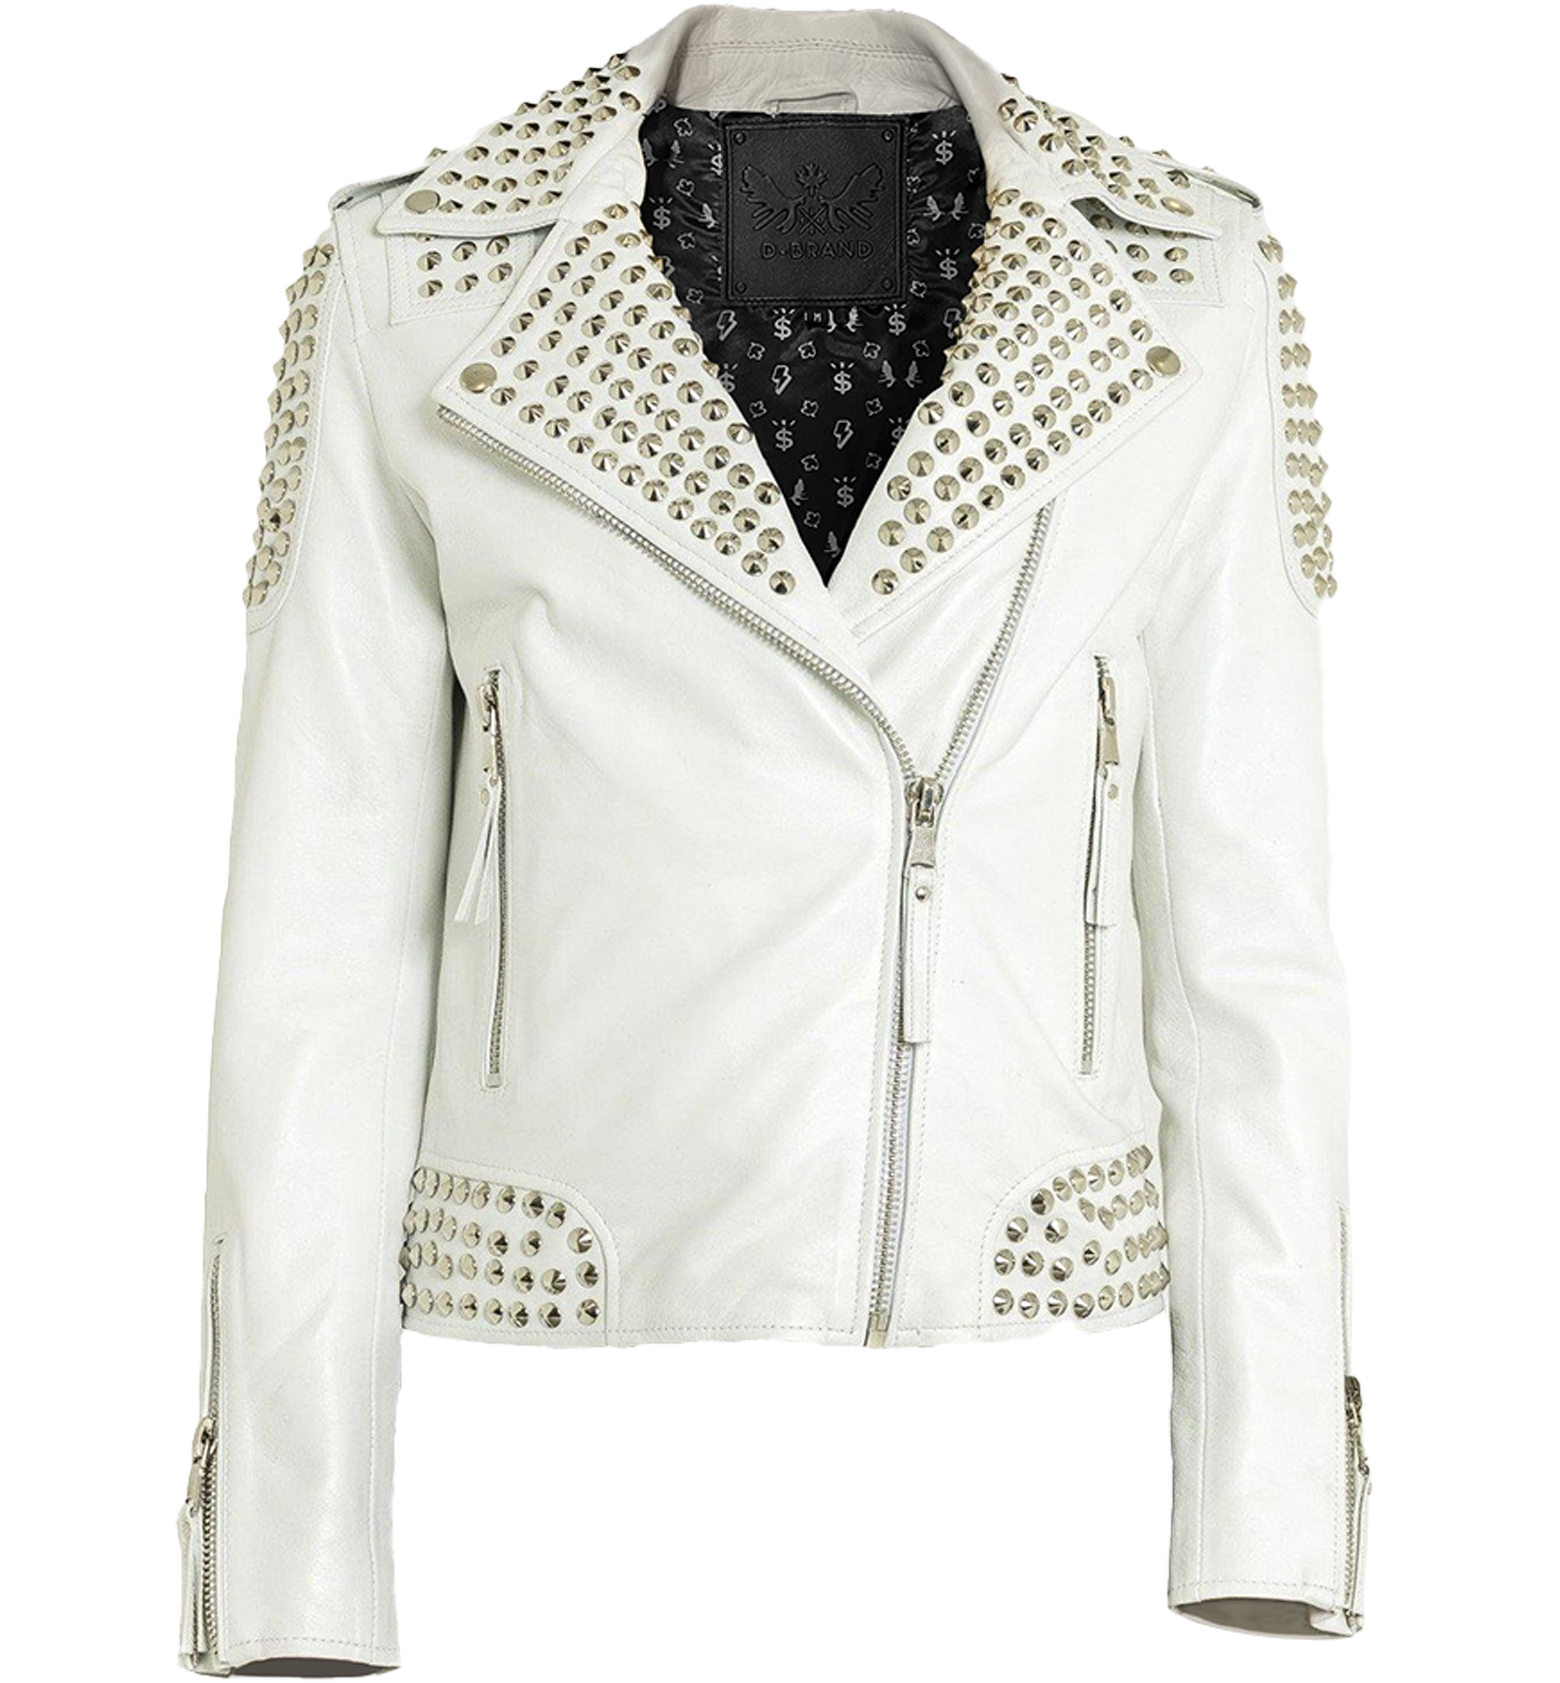 Cuir Dimitri Crystal Women’s Leather Jacket w/ Studs XS at FORZIERI